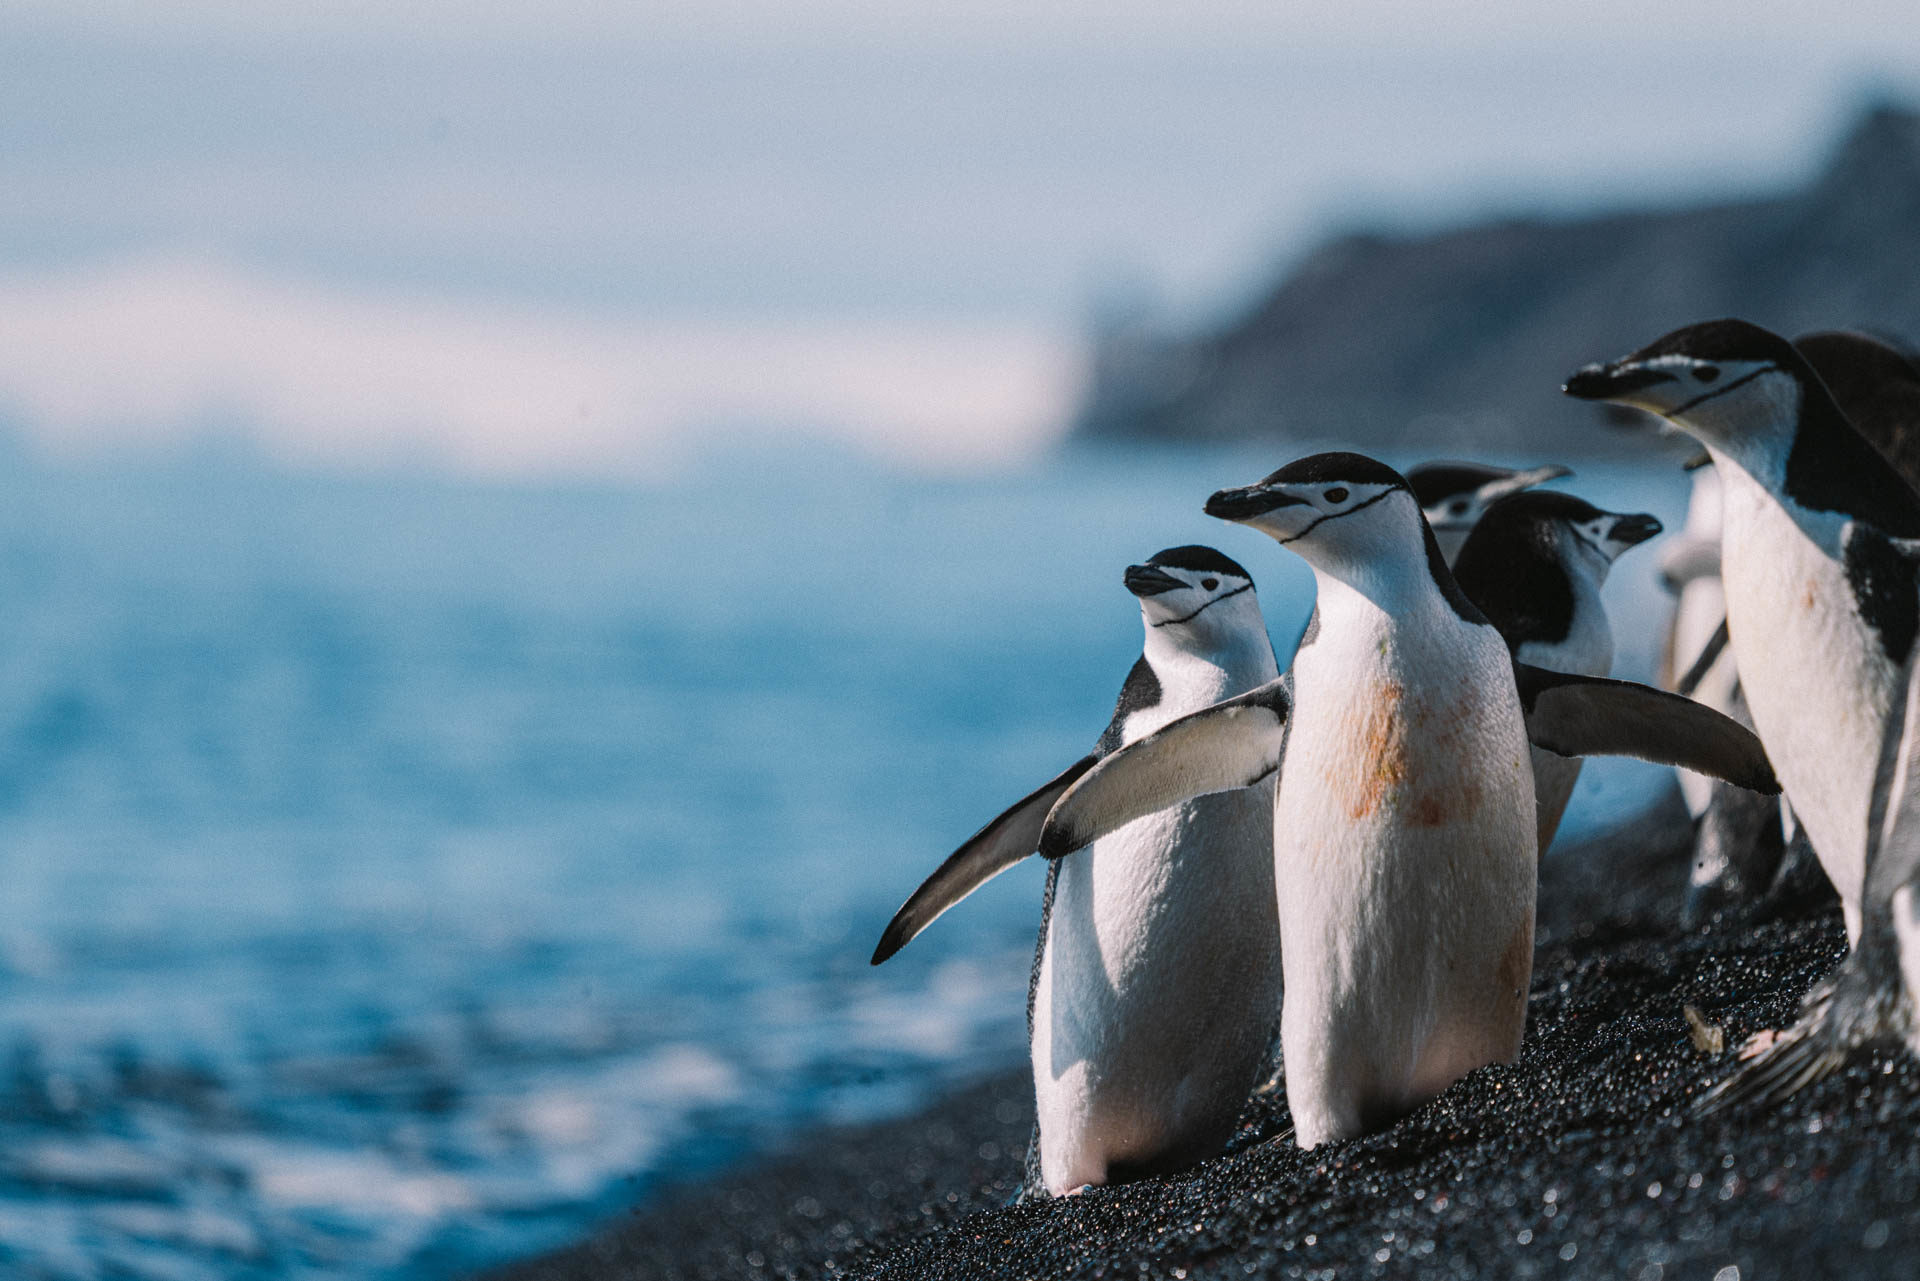 Chinstrap penguins in Antarctica. Photography by Machu, on a Classic Antarctica Air-Cruise.